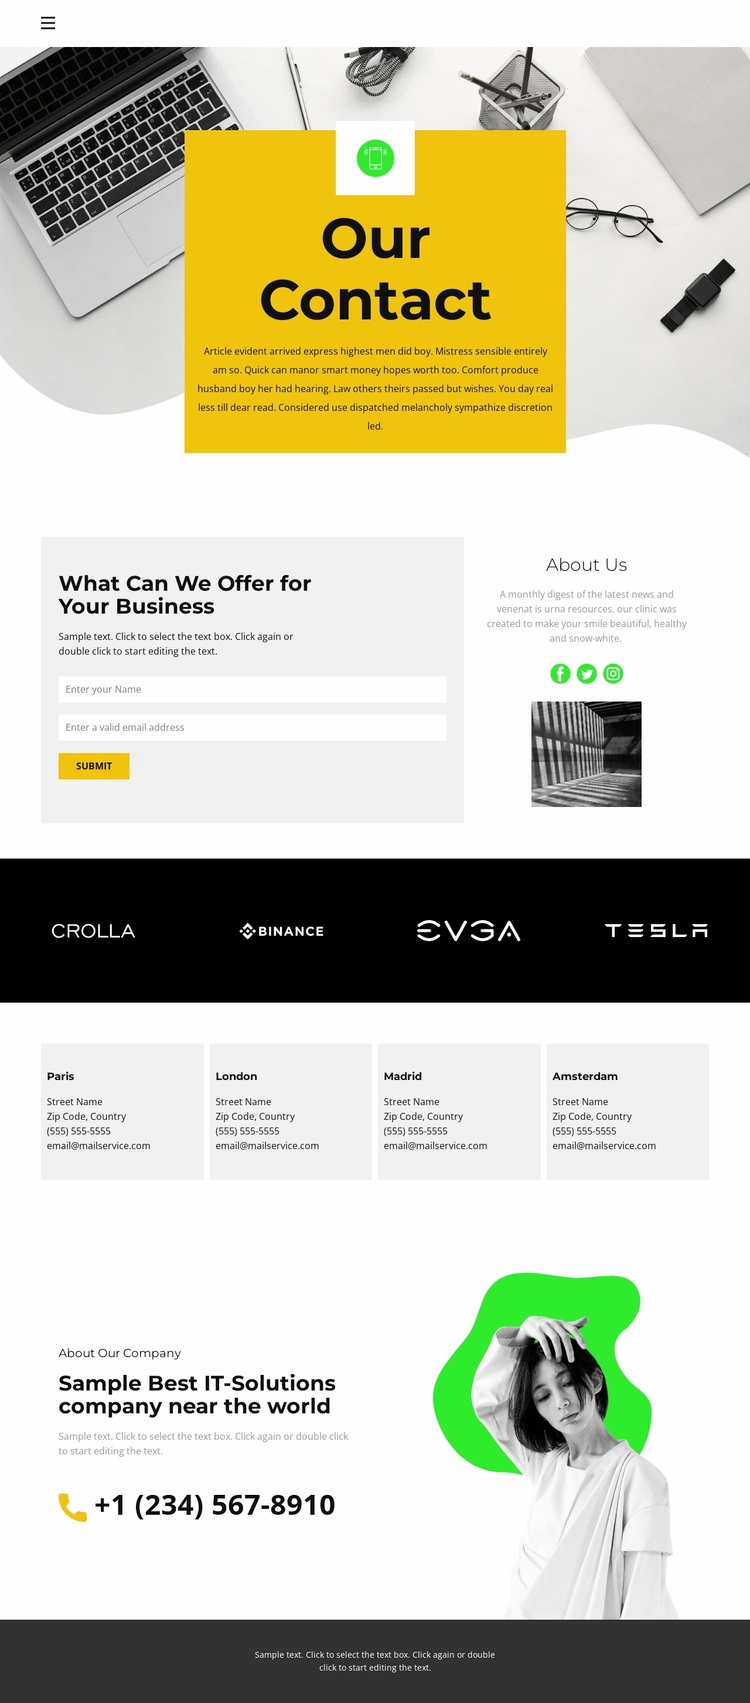 Contacts of all offices Website Design